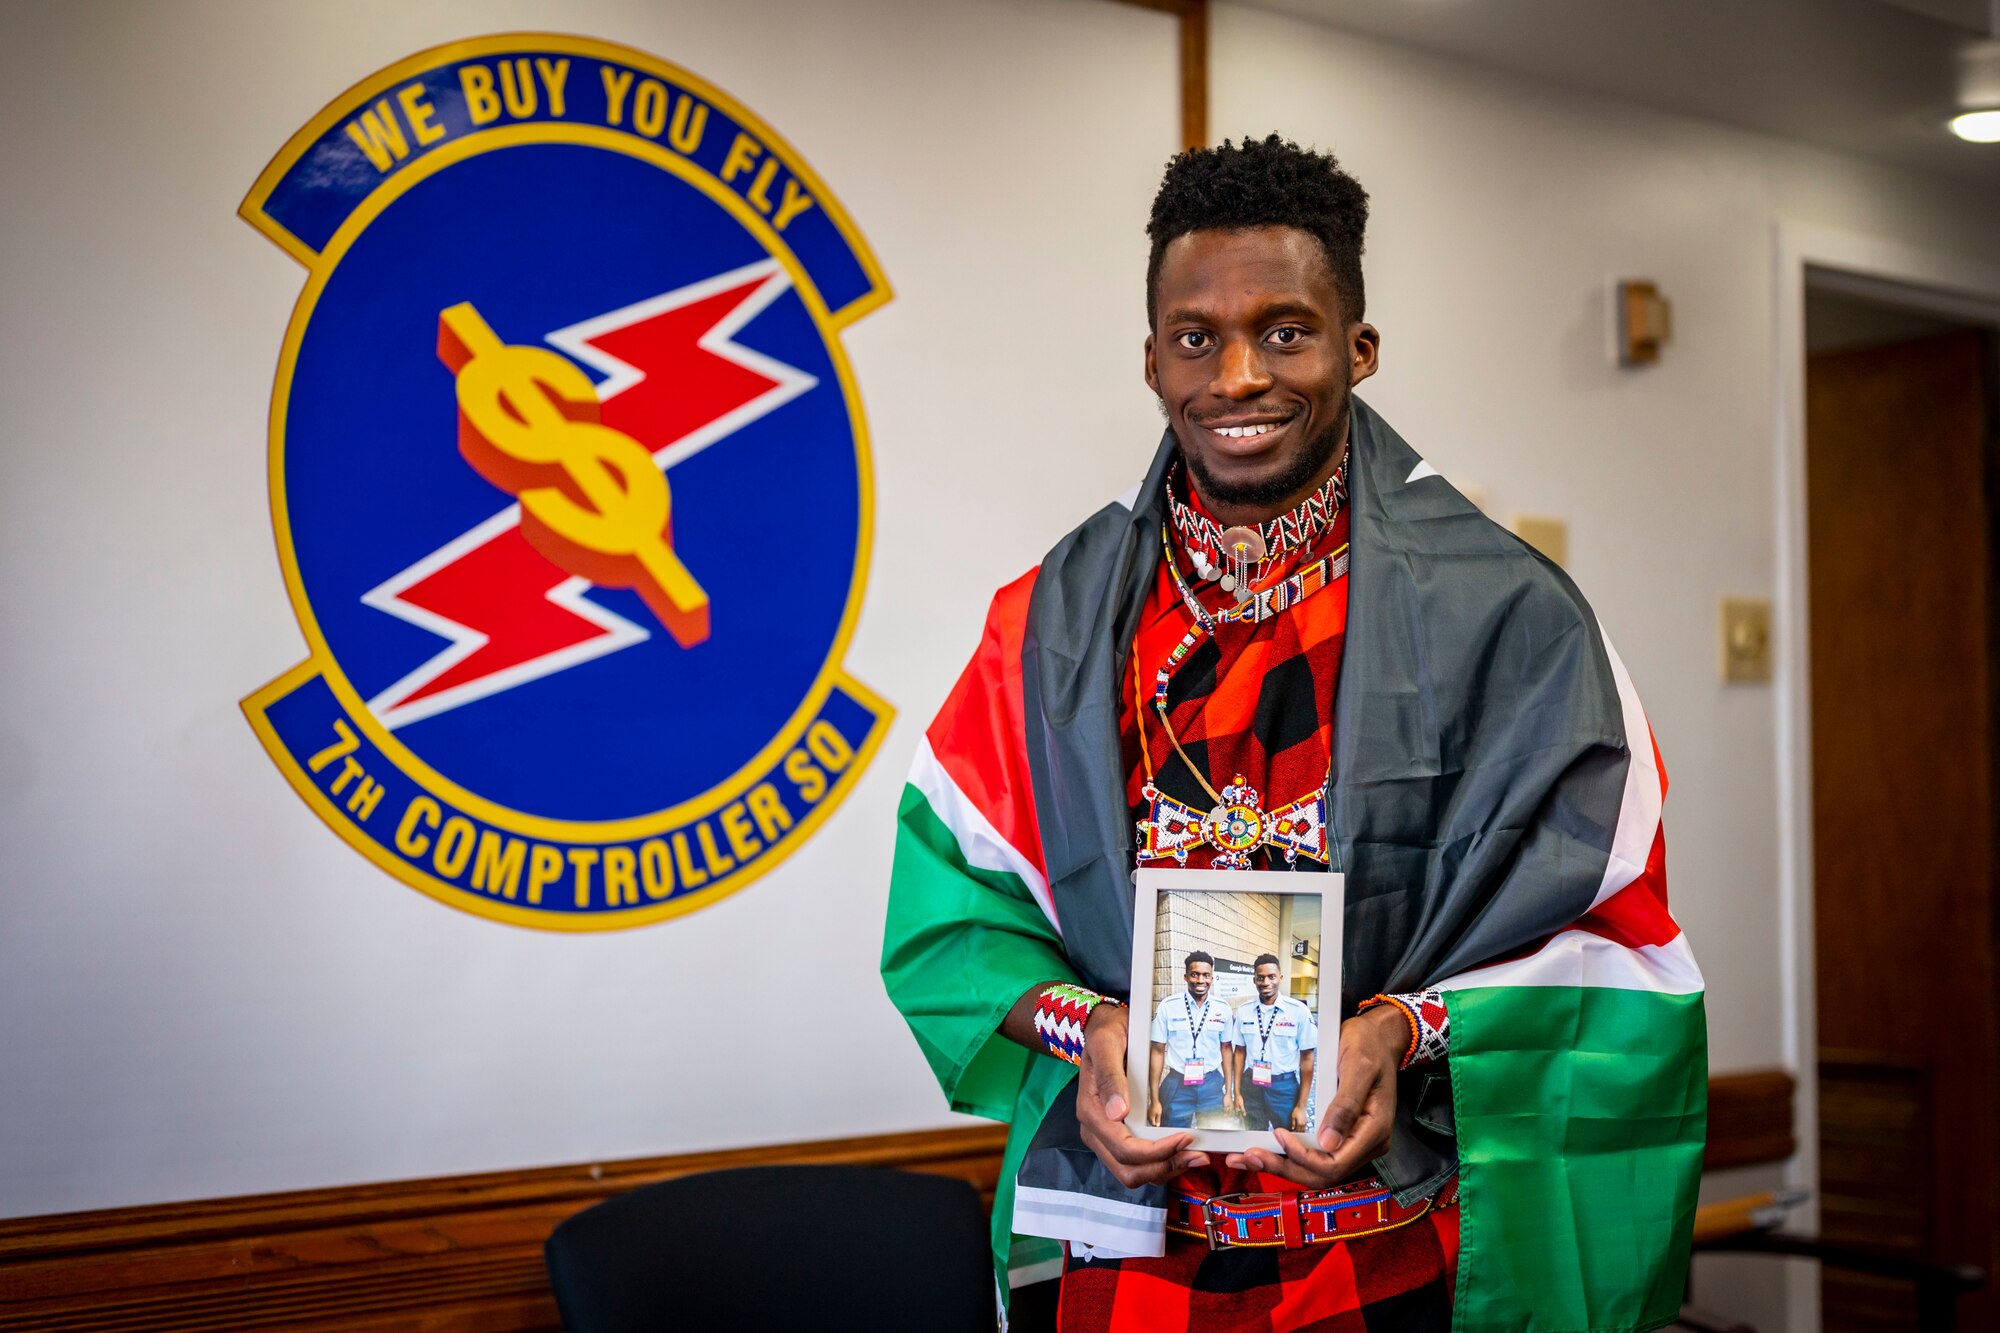 U.S. Air Force Senior Airman Daniel Omwoha, 7th Comptroller Squadron financial analyst technician, holds a photo of him and his brother while wearing a traditional Kenyan dress during Black History Month at Dyess Air Force Base, Texas, Feb. 9, 2023. Omwoha was born and raised in Nakuru, Kenya, in a family of 6. His journey is unique, joining the Air Force alongside his identical twin brother, who is currently stationed at Langley AFB, also in the finance career field. Omwoha takes pride in his job and believes in getting better every day and helping anybody in need. (U.S. Air Force photo by Senior Airman Leon Redfern)